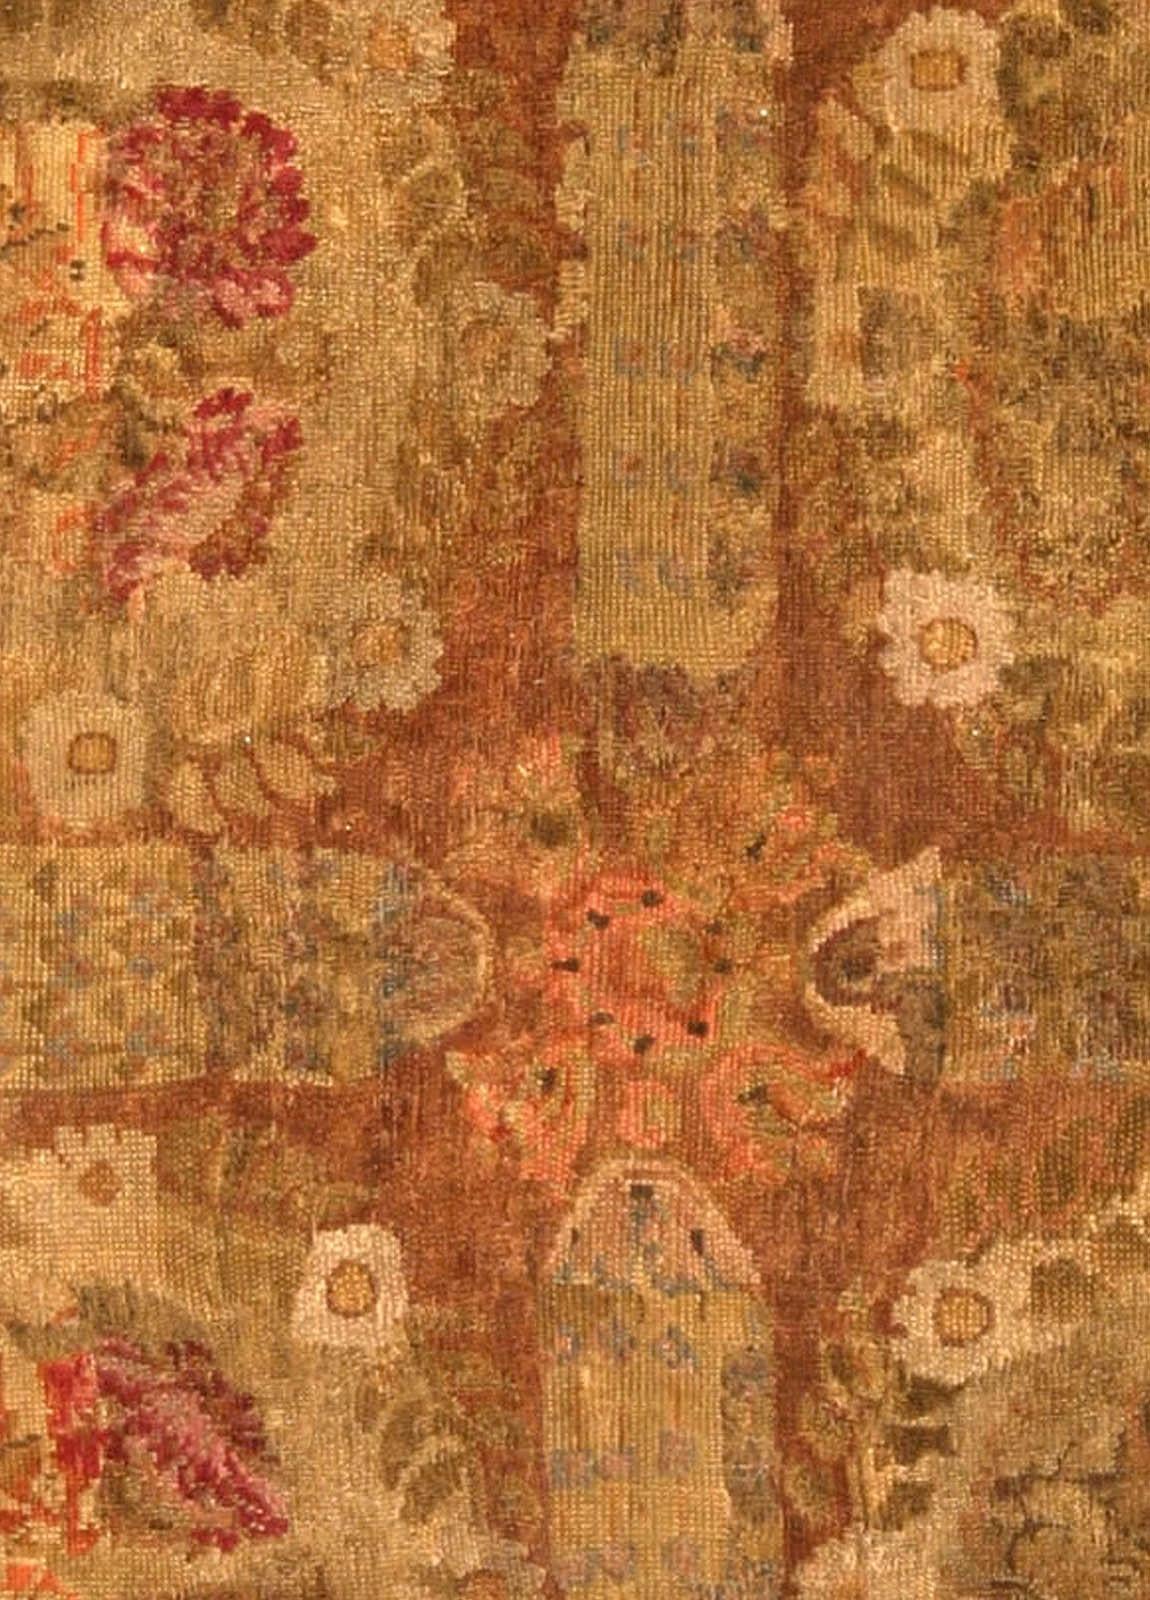 1800s French Savonnerie Floral Brown, Green Hand Knotted Wool Rug
Size: 8'6